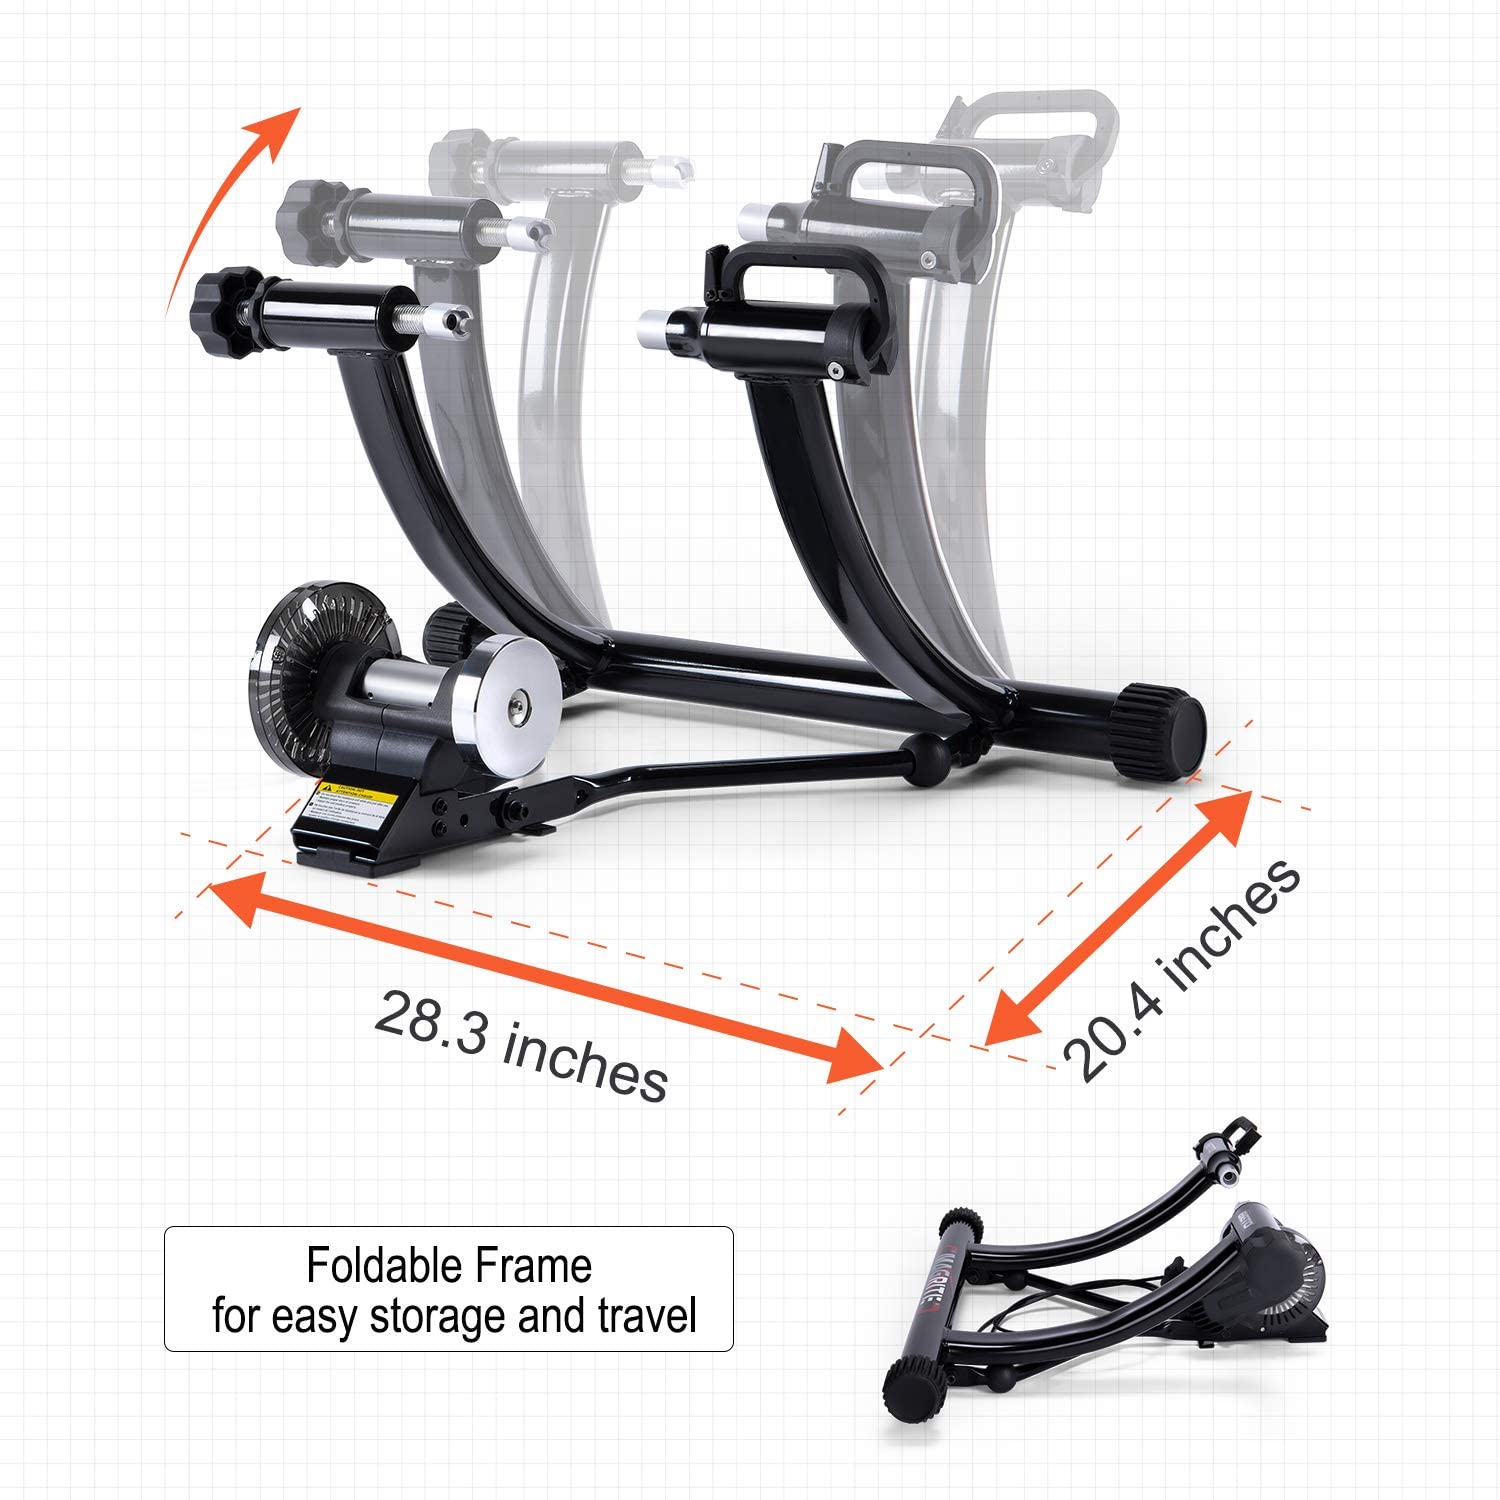 Bike Trainer Stand fits 24” to 29” Bikes - Portable Magnetic Bicycle Rollers 5 Resistance Levels, Noise Reduction - Stationary Exercise for